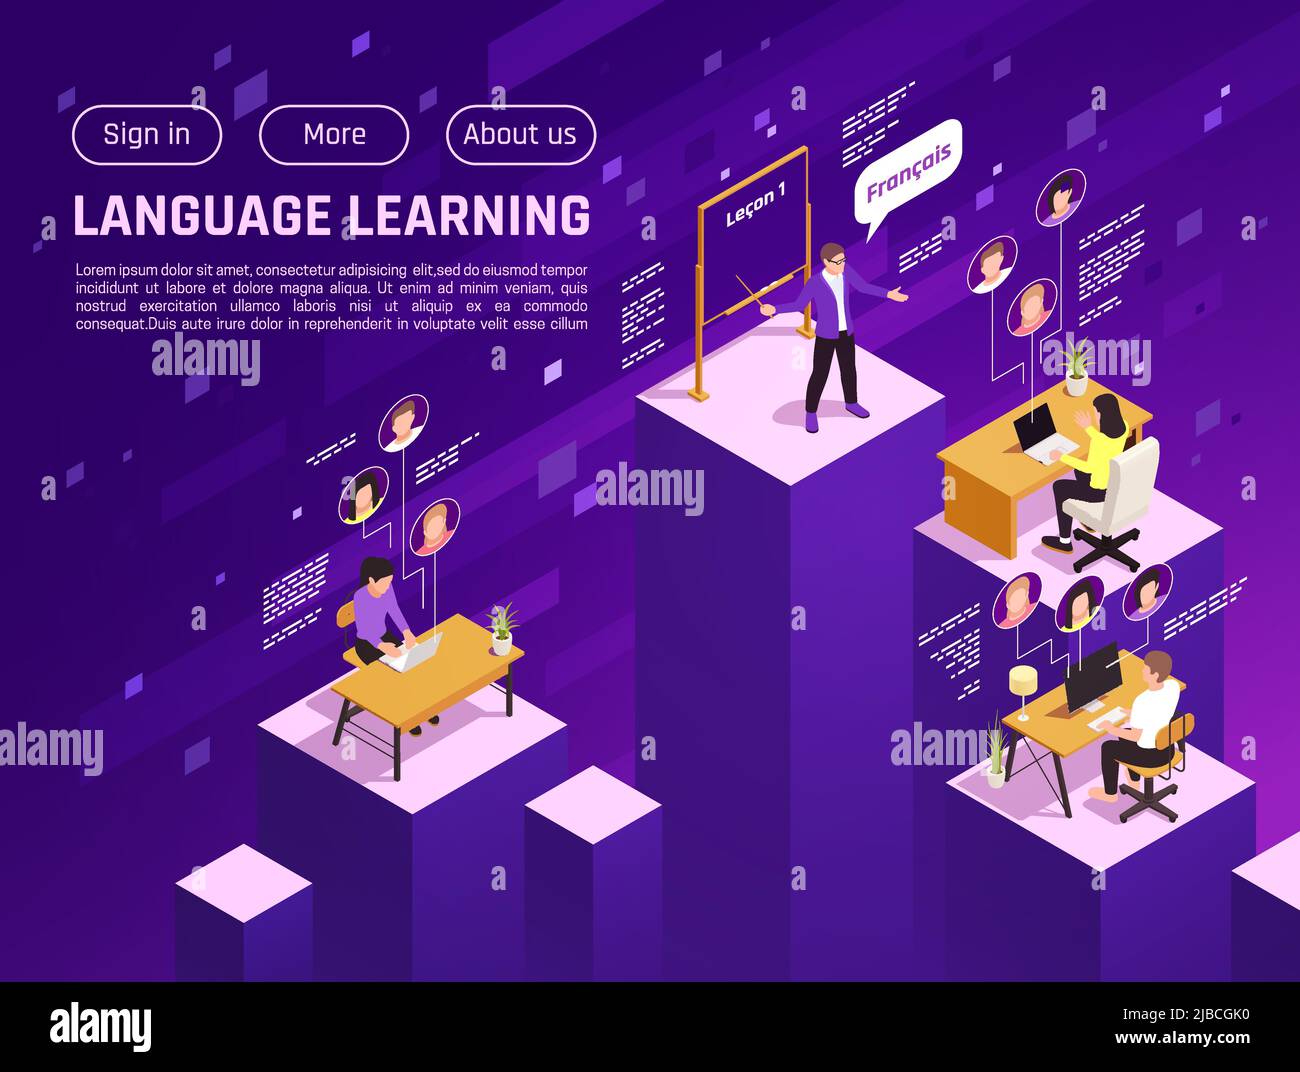 Online language school website isometric landing page with learning french virtual lesson purple background vector illustration Stock Vector